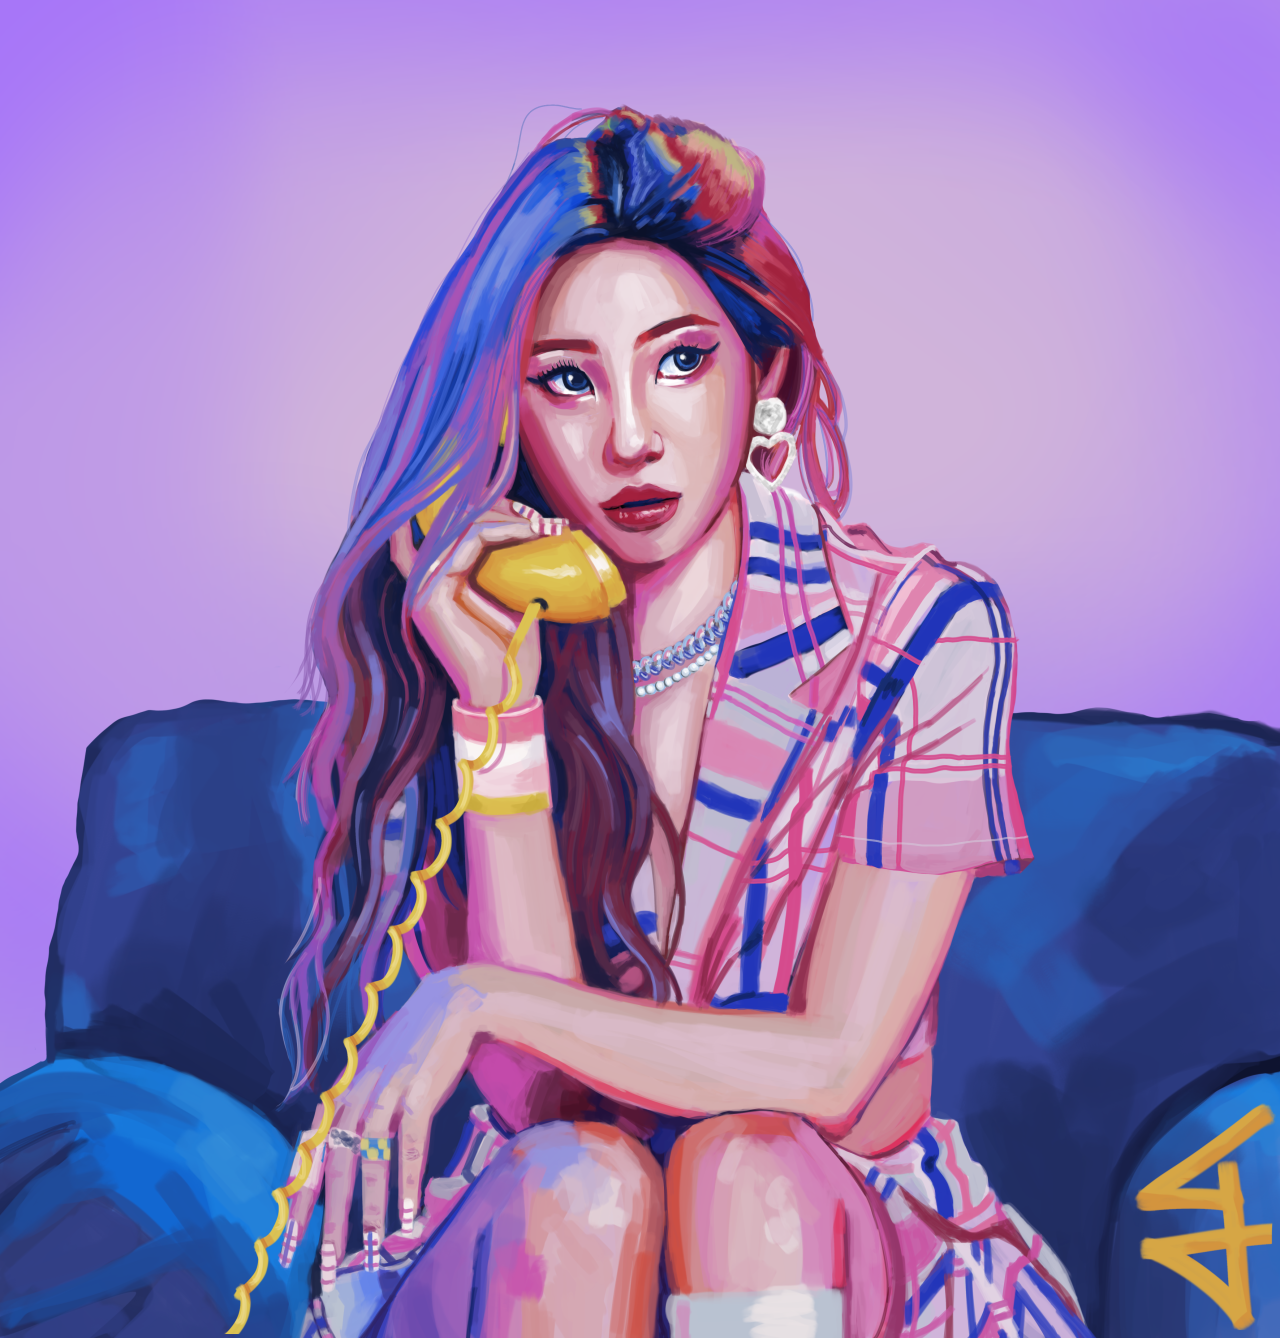 who do you think you are?! you can’t sit with us! #sunmi#lee sunmi#wonder girls#sunmi fanart#my fanart#digital drawing#my Kpop fanart#kpop #you cant sit with us  #started this drawing when you cant sit with us came out so six (6) months ago????  #perseverance is the key #enjoyyyyyy #its messy but oh well #miyane